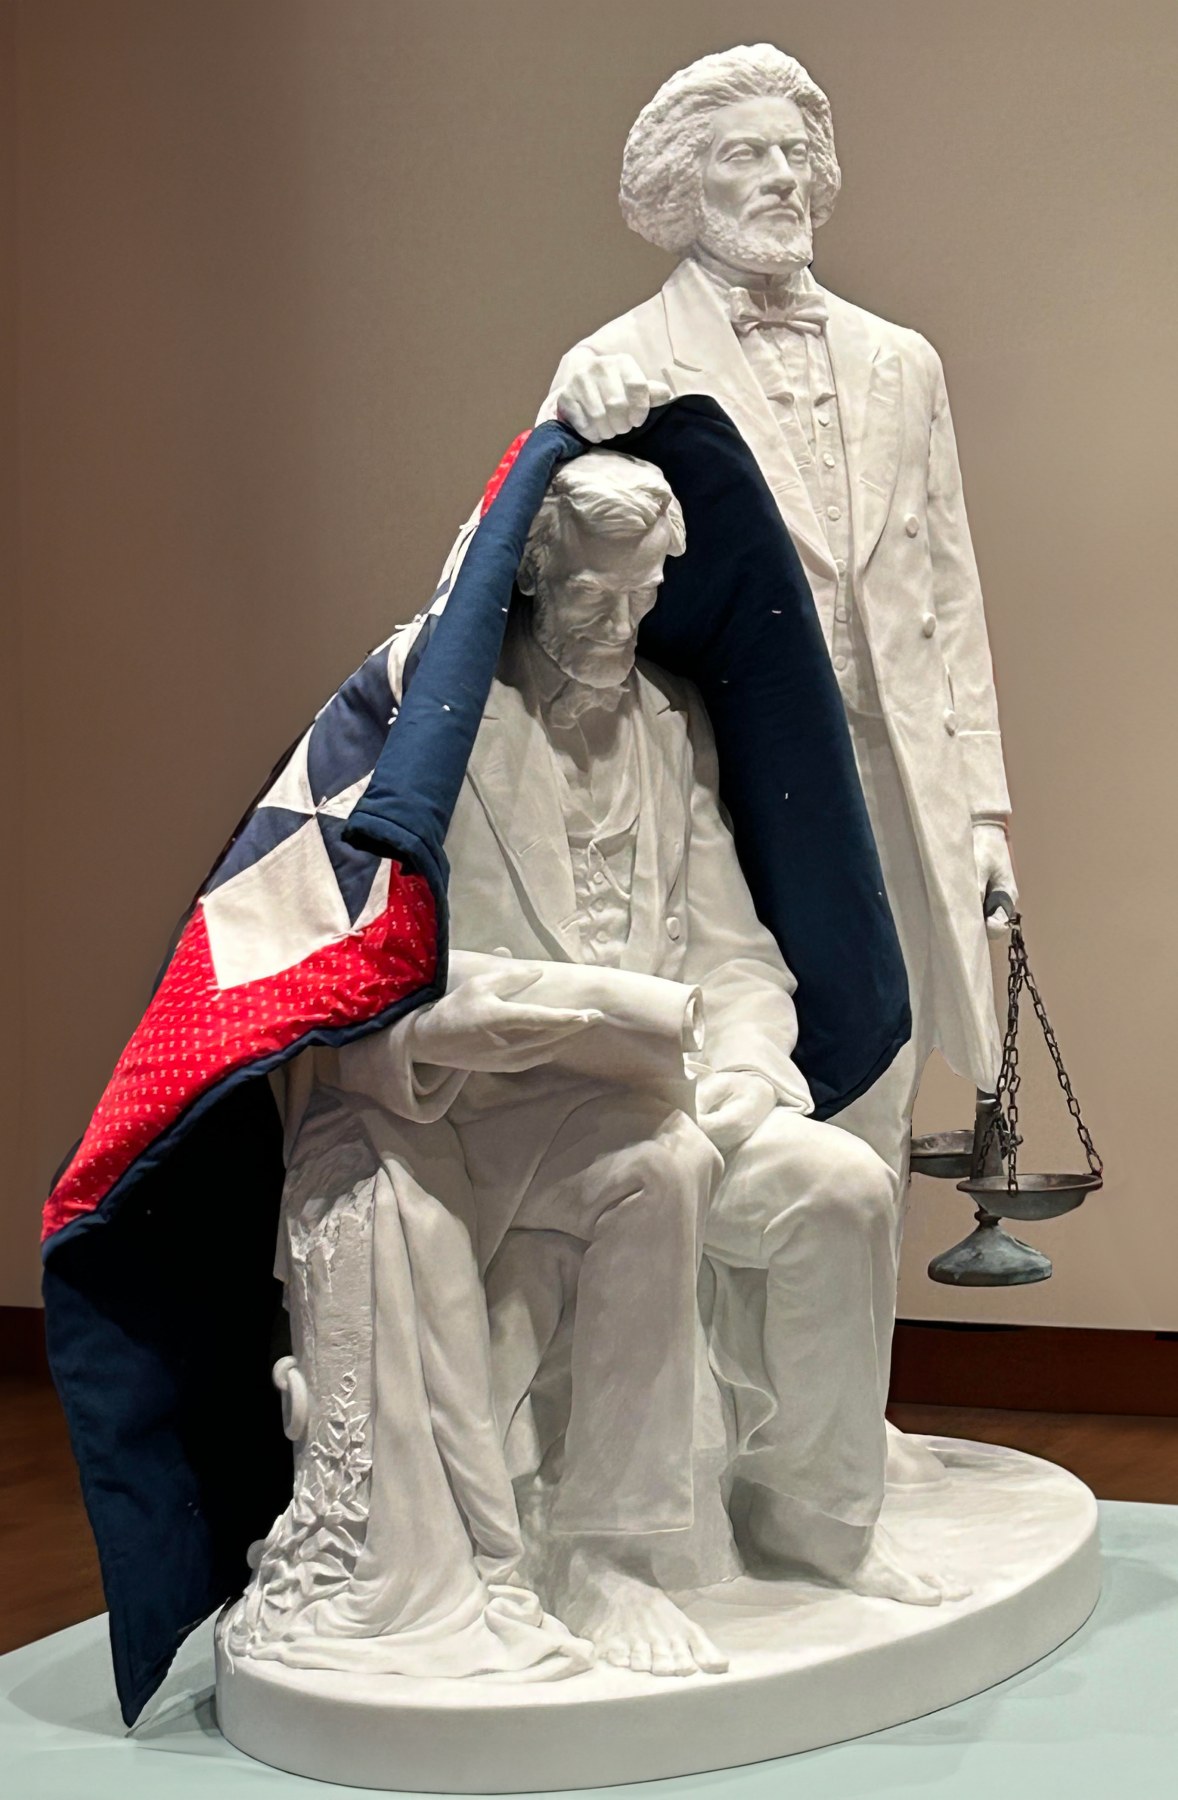 Lifting the Veil: A Powerful Sculpture Reflecting African American History at Chazen Museum